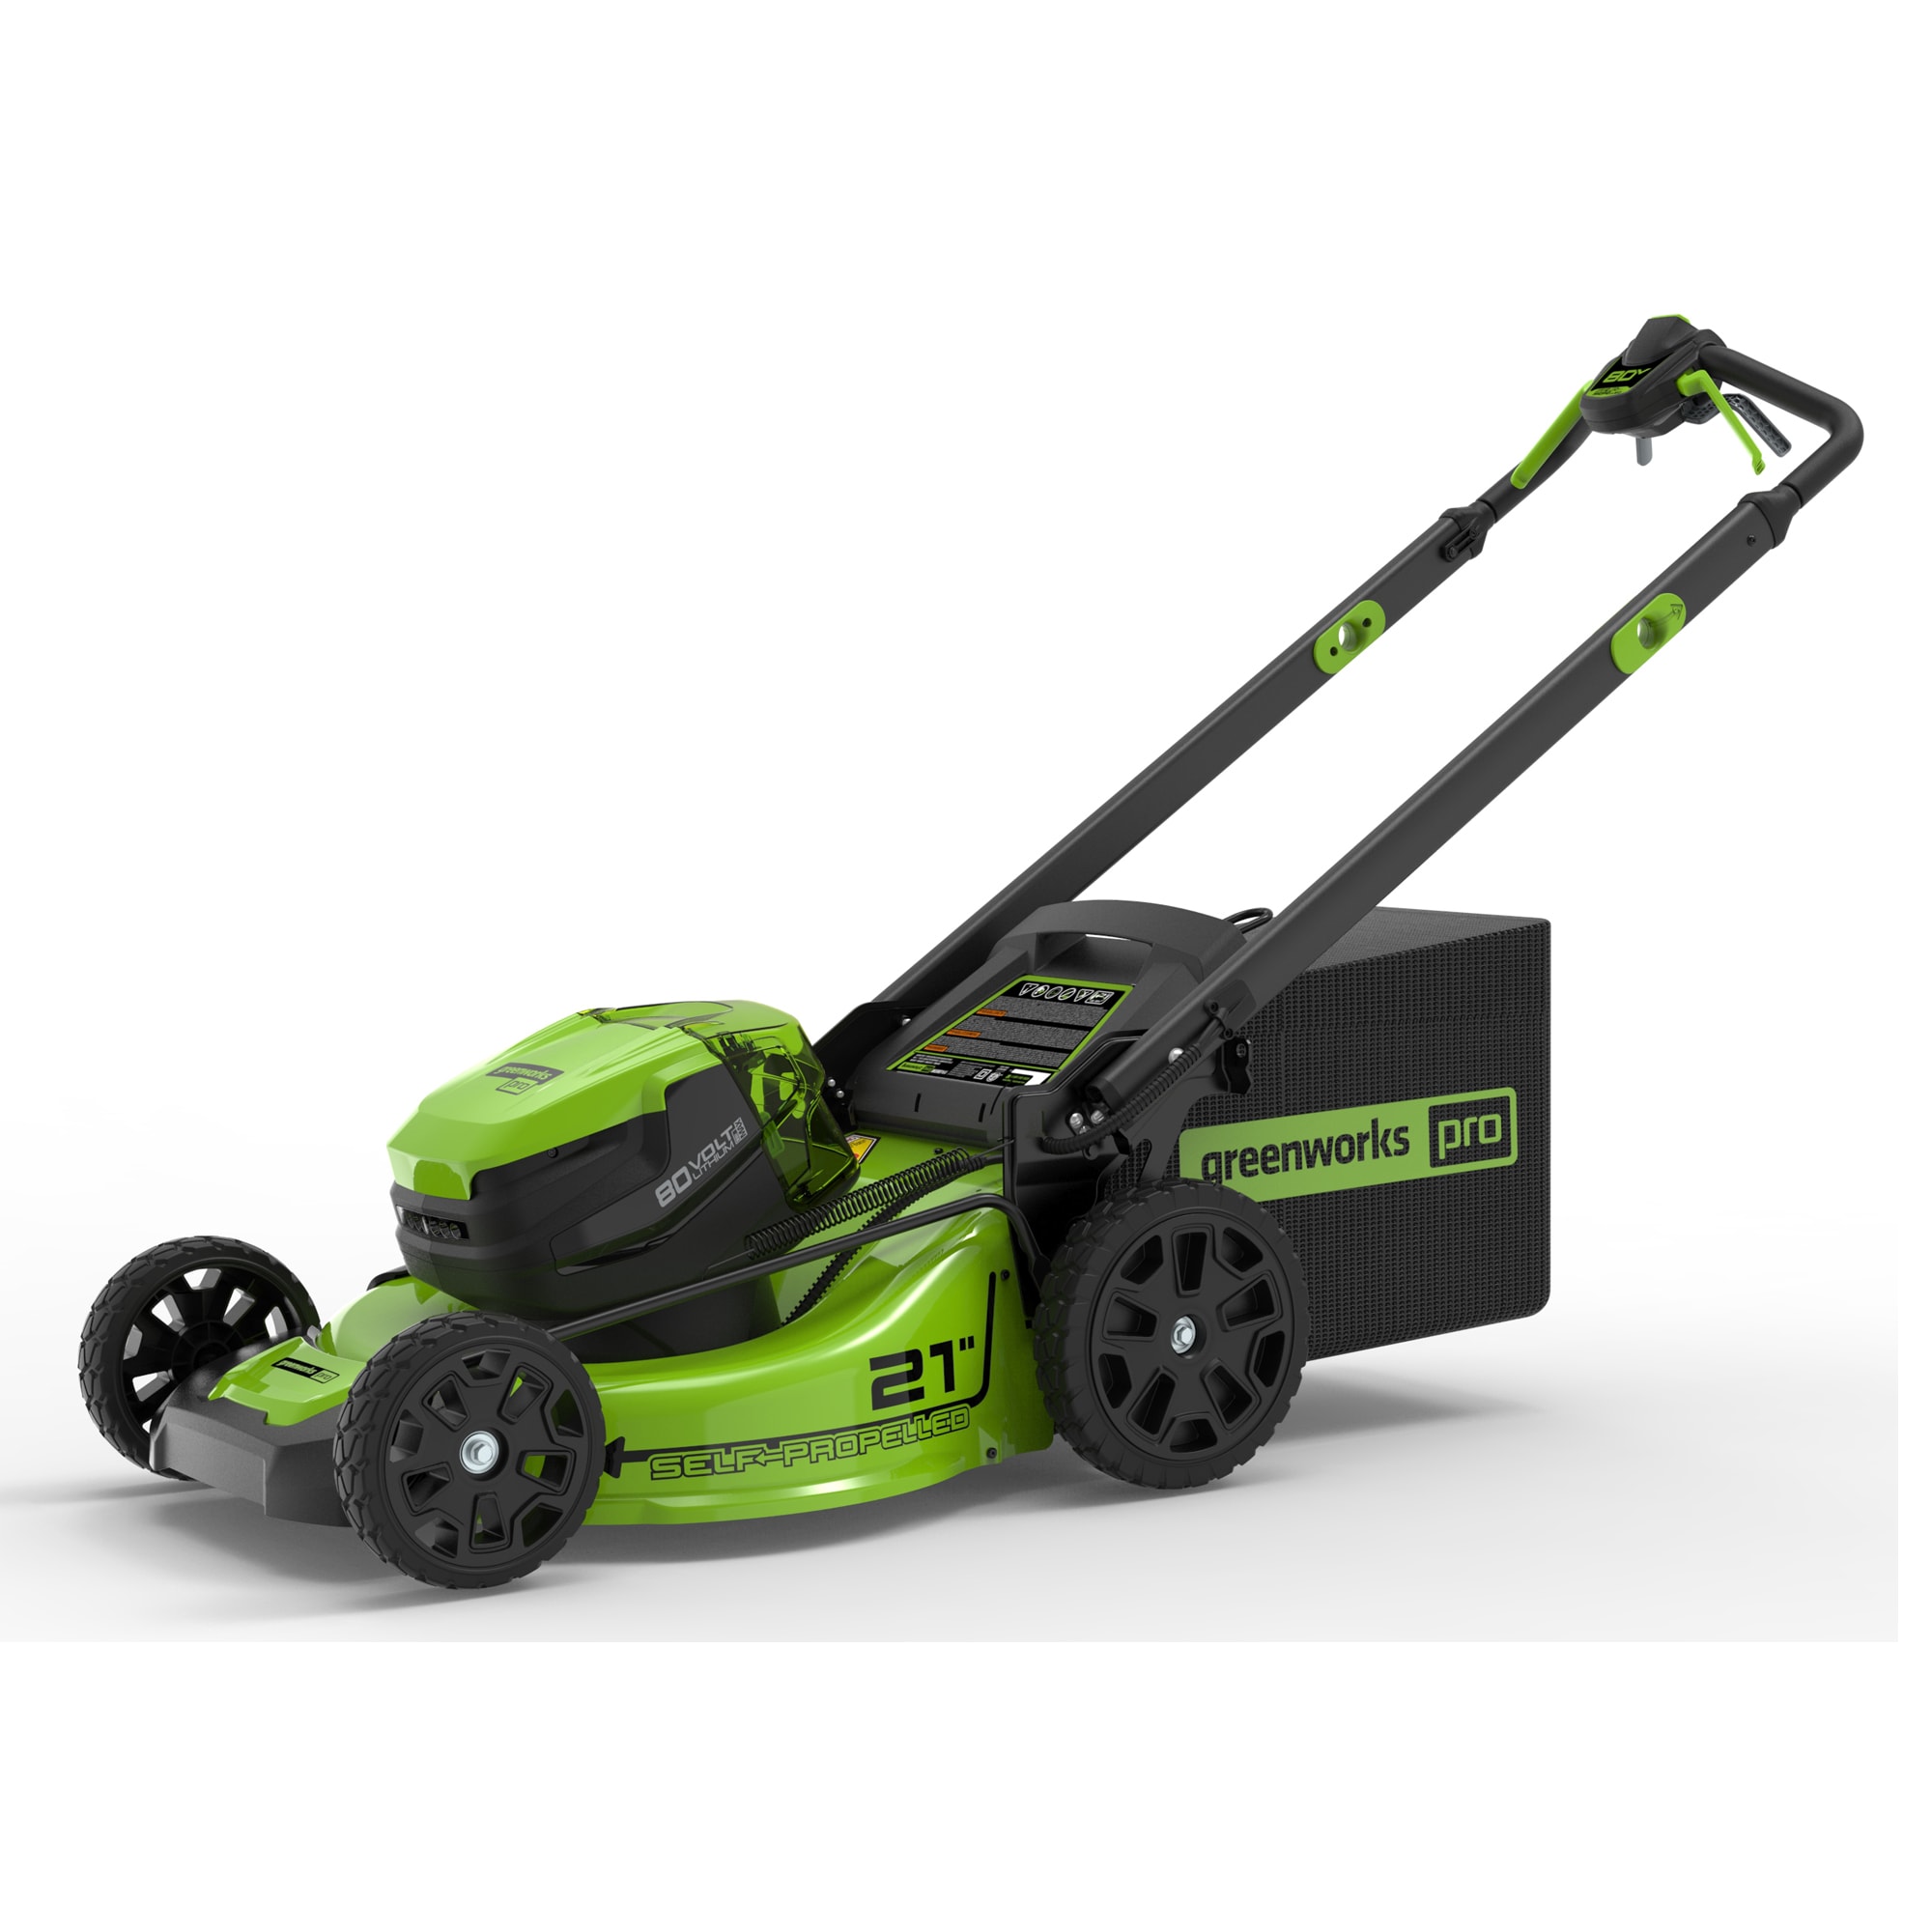 Greenworks Pro 21-Inch 80V Self-Propelled Cordless Lawn Mower, Tool-Only,  MO80L00